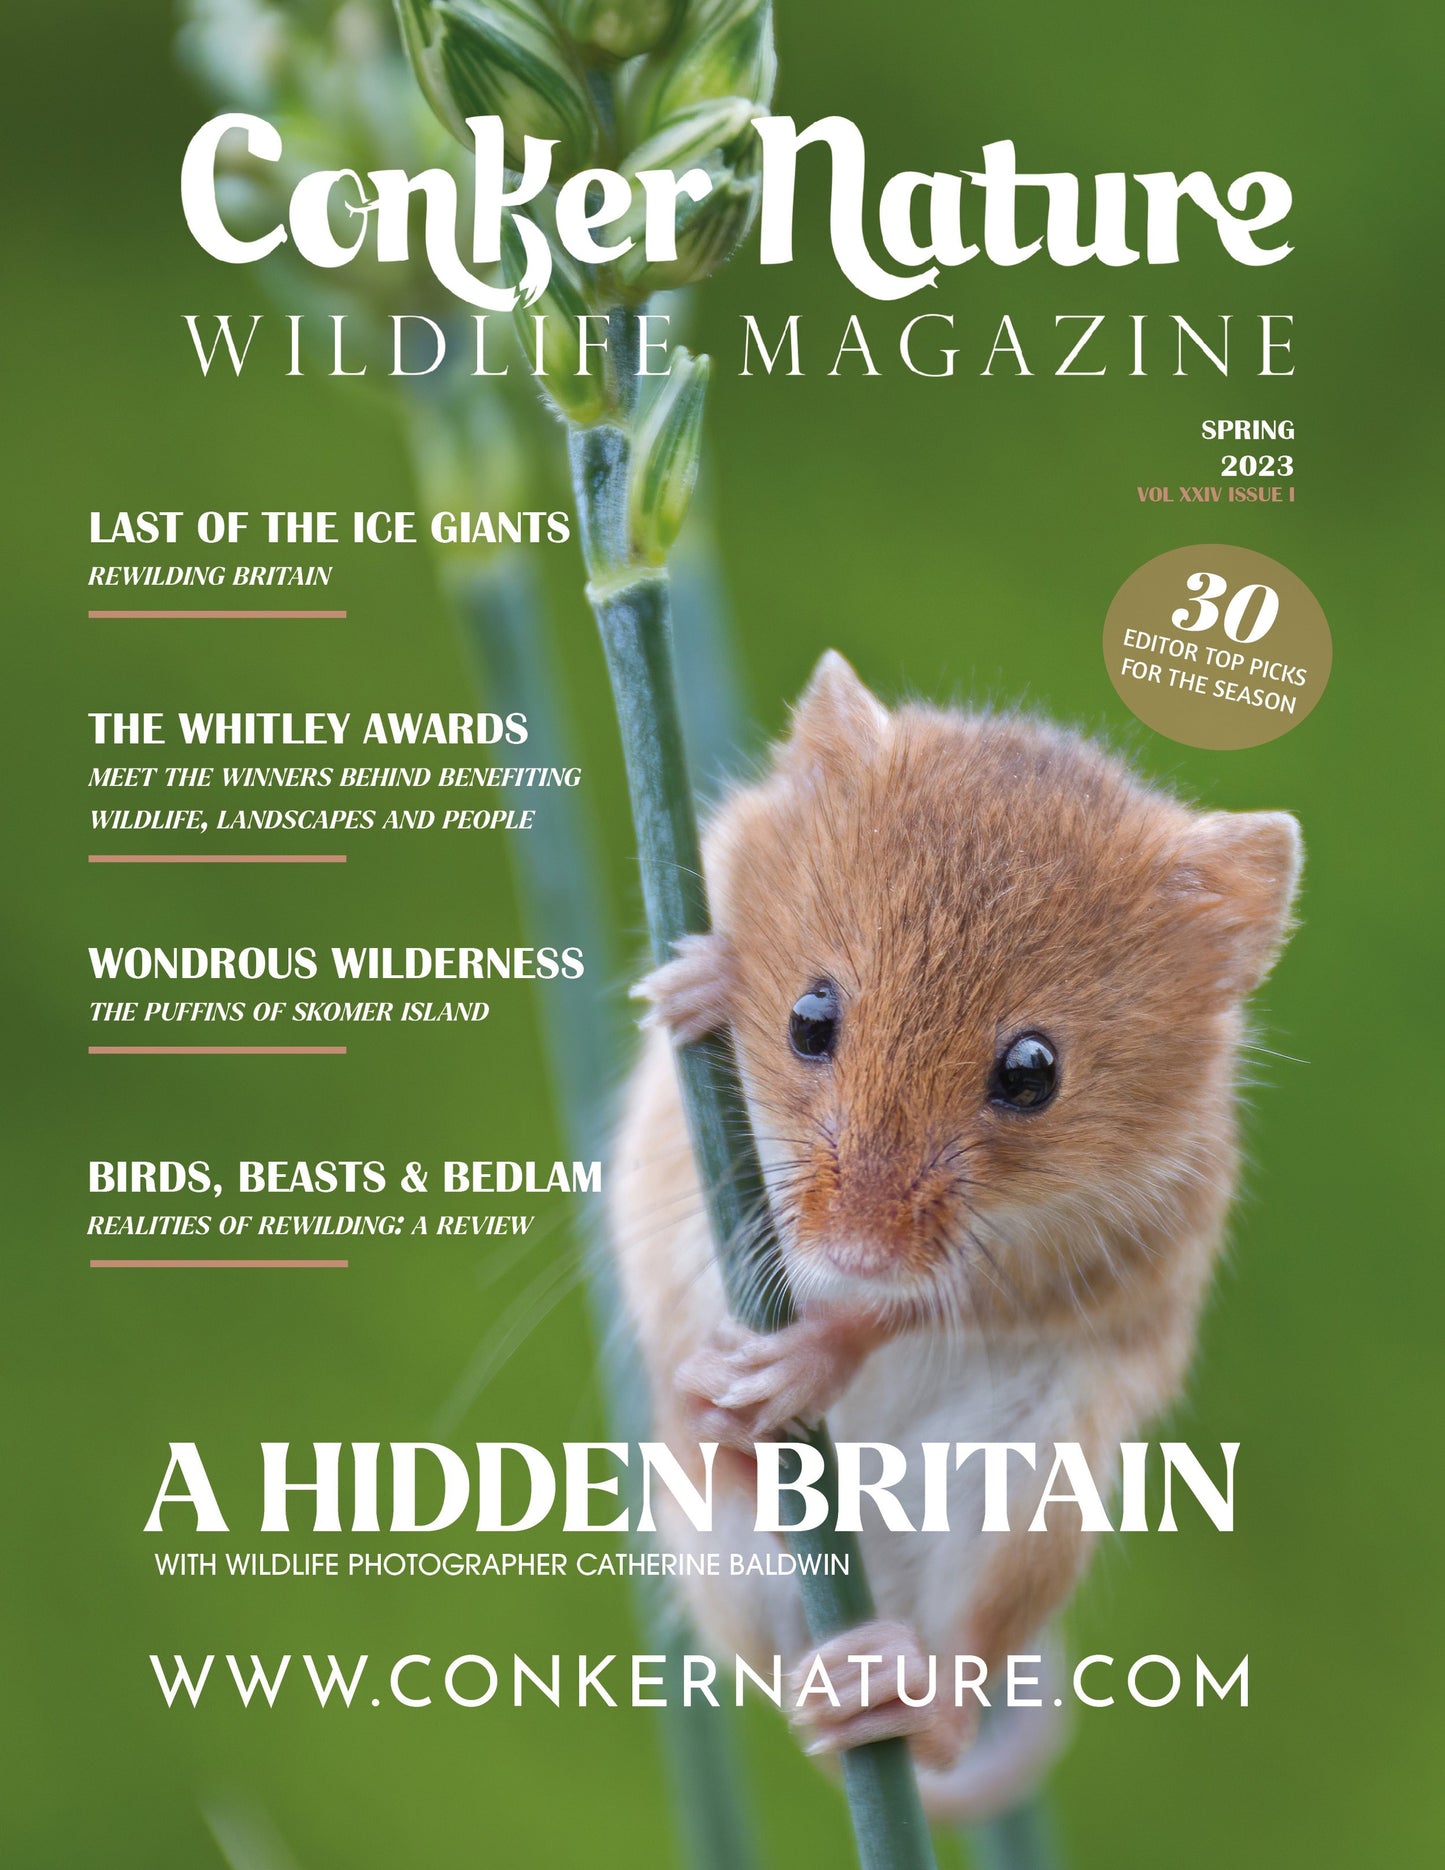 CONKER NATURE MAGAZINE | SPRING | THE HIDDEN BRITAIN ISSUE: JUNE 2023 | VOL XXIV ISSUE I